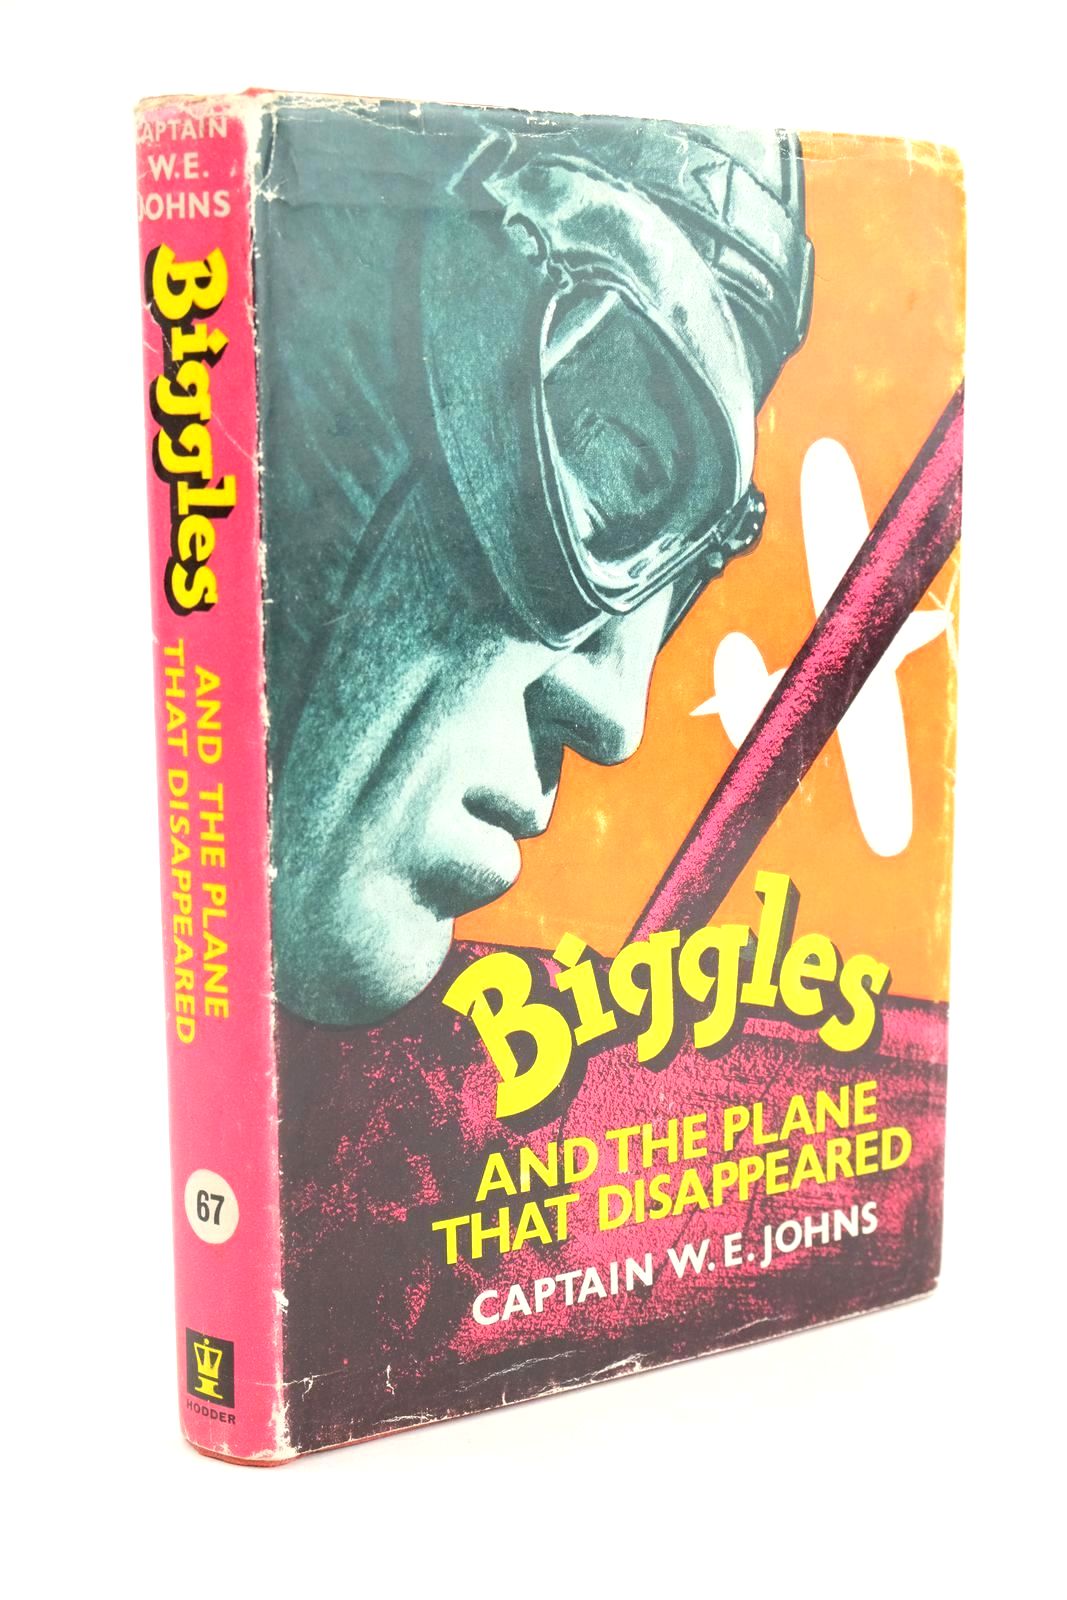 Photo of BIGGLES AND THE PLANE THAT DISAPPEARED written by Johns, W.E. illustrated by Stead, published by Hodder & Stoughton (STOCK CODE: 1324418)  for sale by Stella & Rose's Books